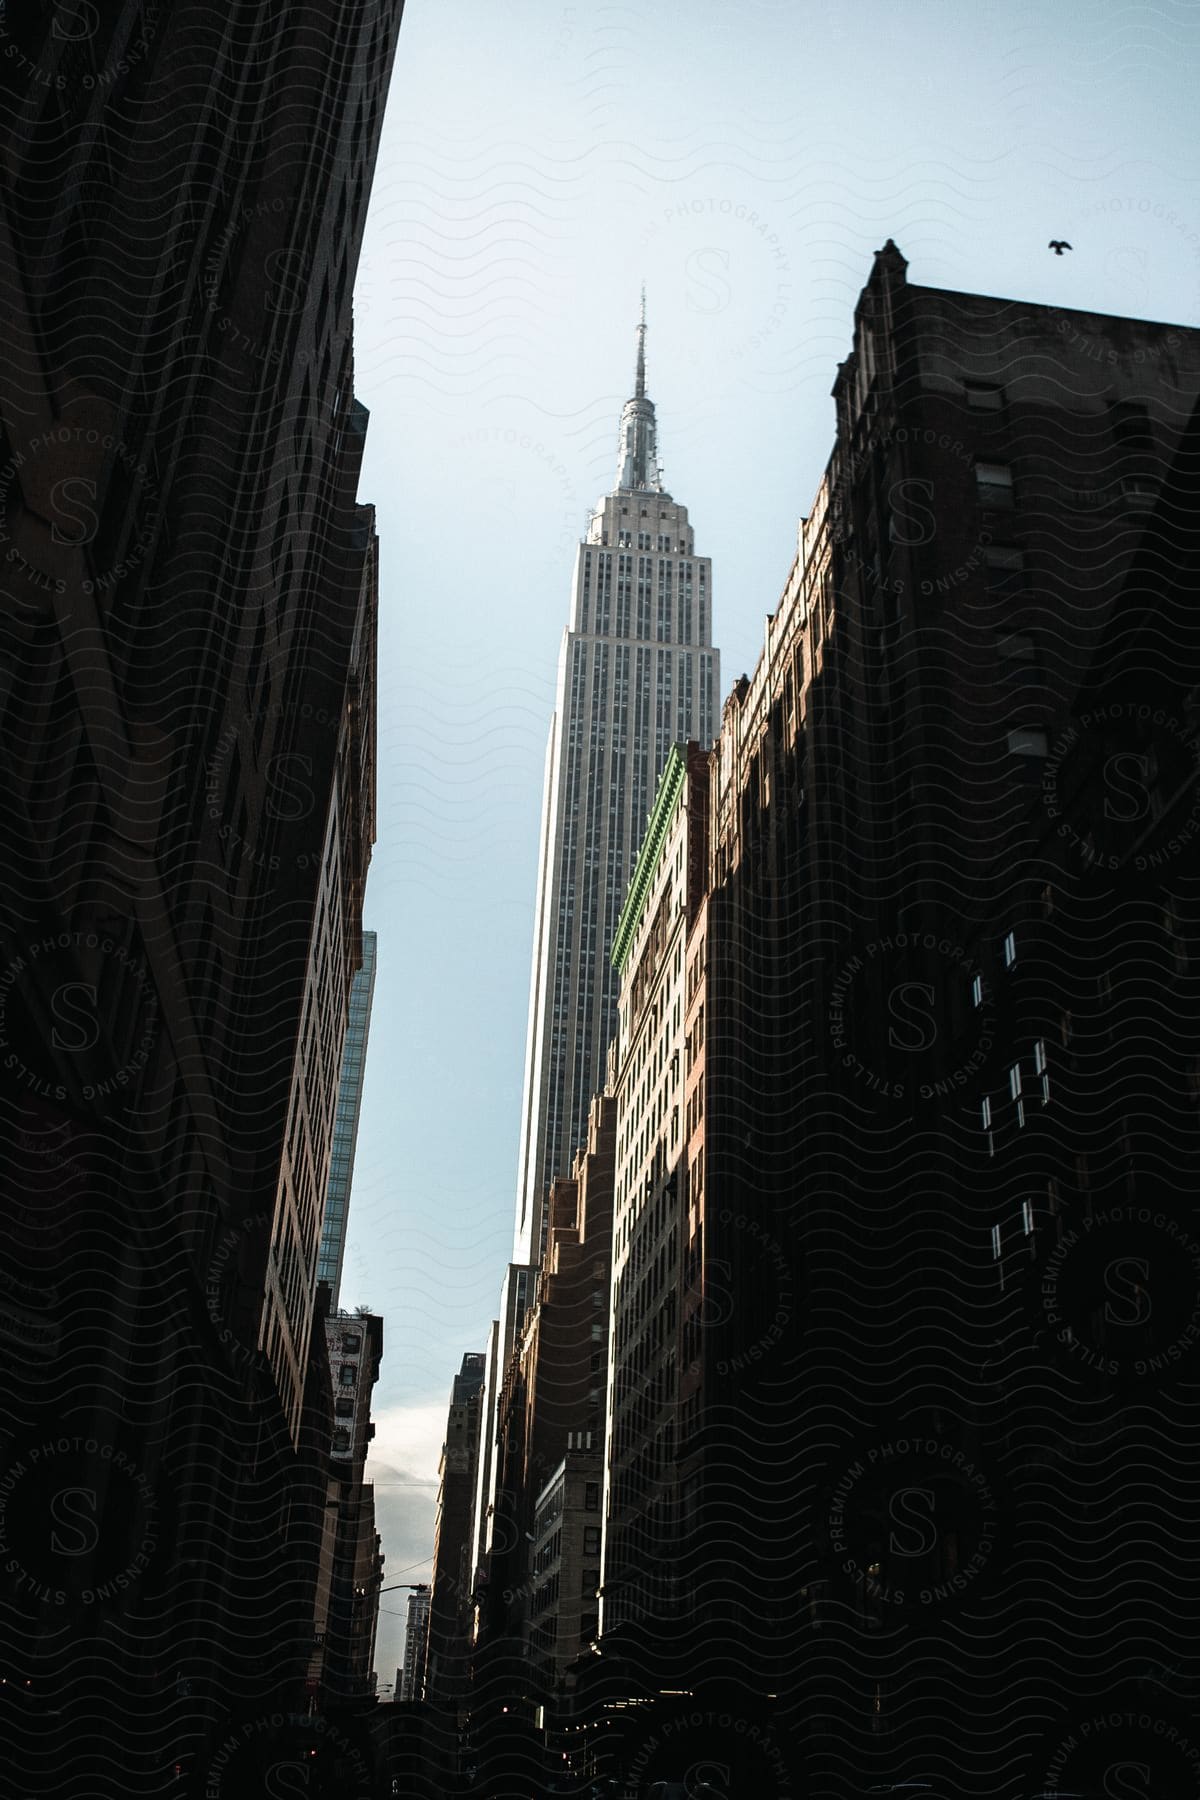 The empire state building seen from the sidewalk